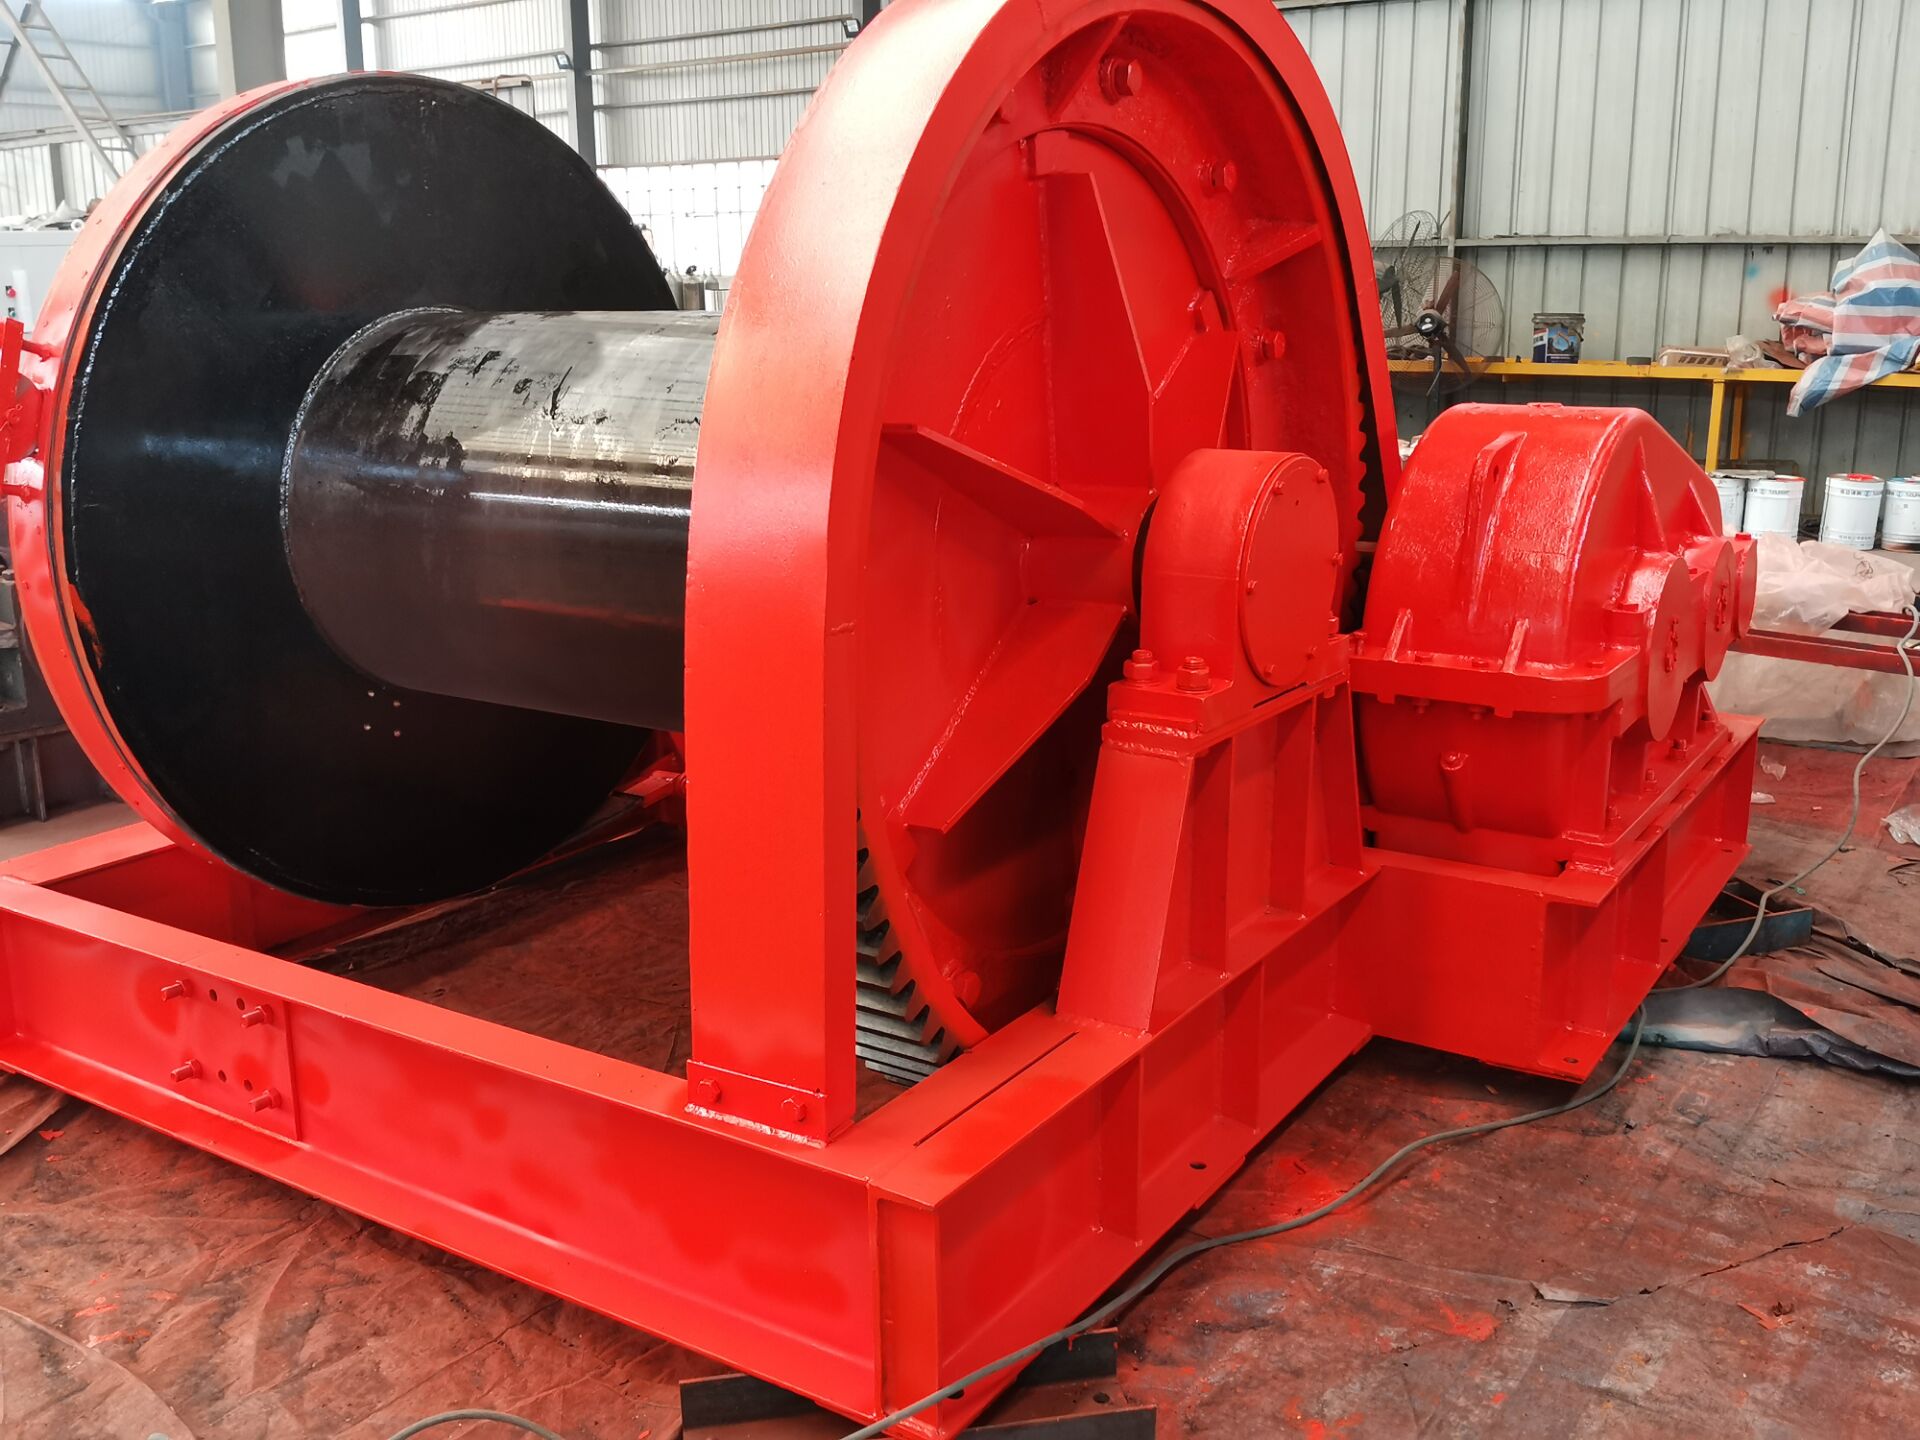 Kazakhstan 20T Electric winch shipped丨NBM latest cooperation project completed